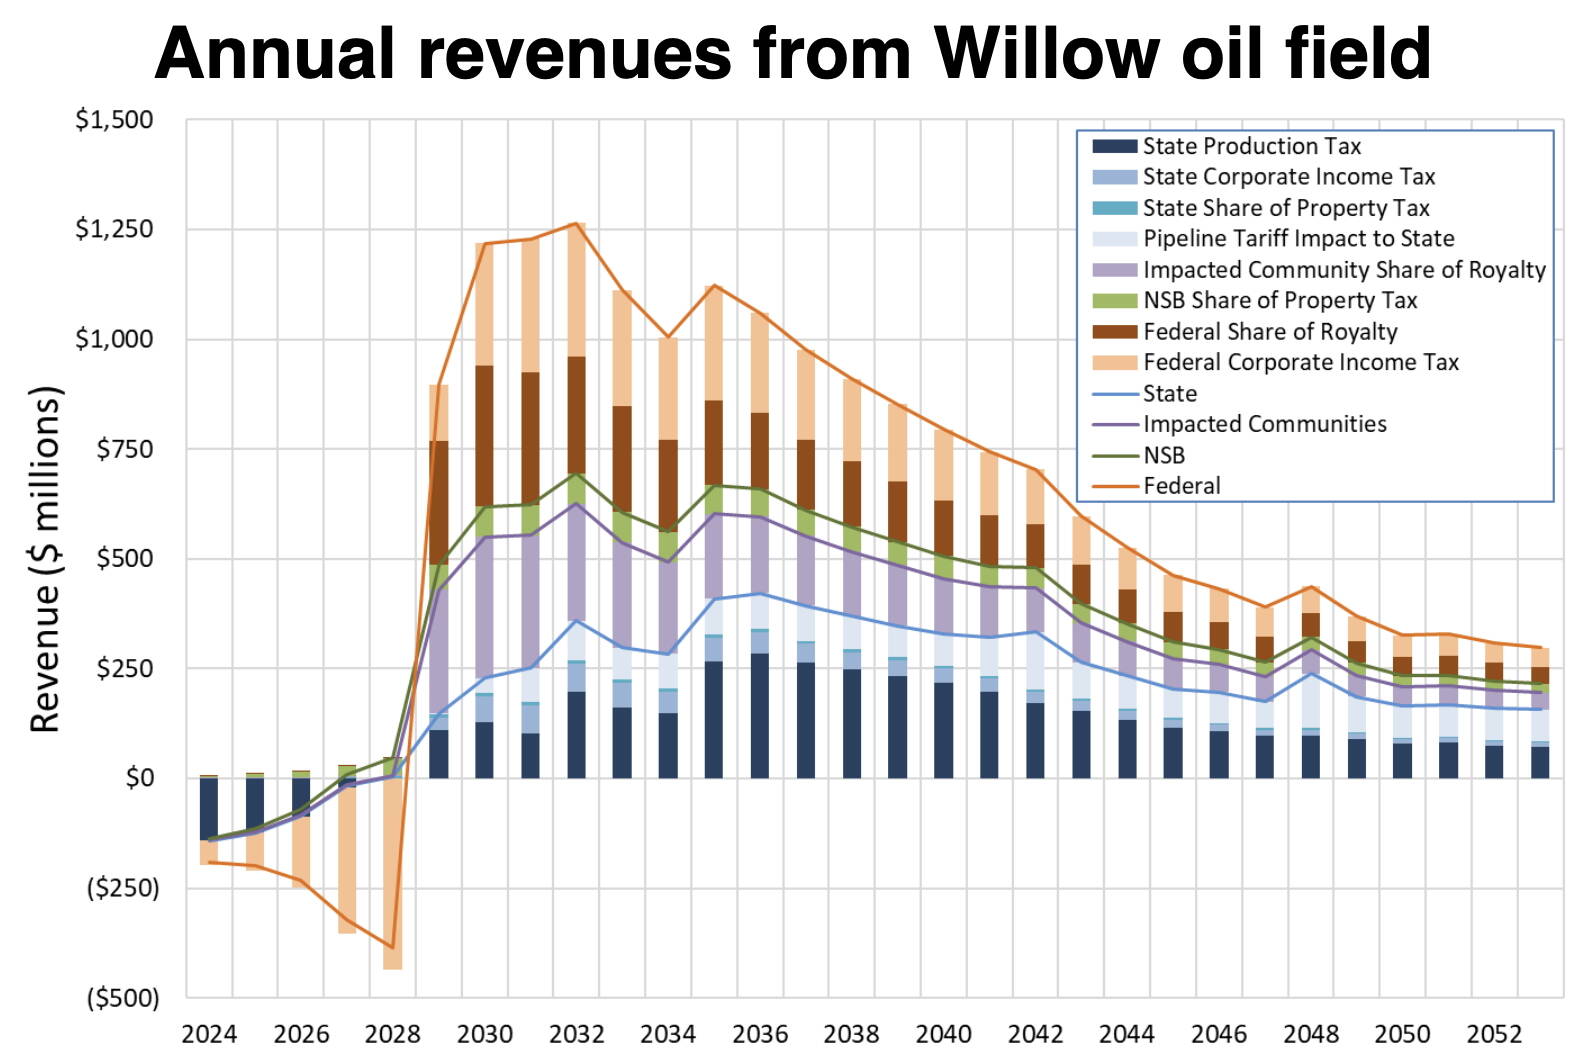 A graph shows projected monetary losses and gains for government and private stakeholders in the Willow oil field project, which for the state is expected to reach a break-even point in 2030, a year after production is scheduled to begin. But a complex set of tax structures and unknown variables may cause those predictions to differ considerably. (Alaska Department of Natural Resources)